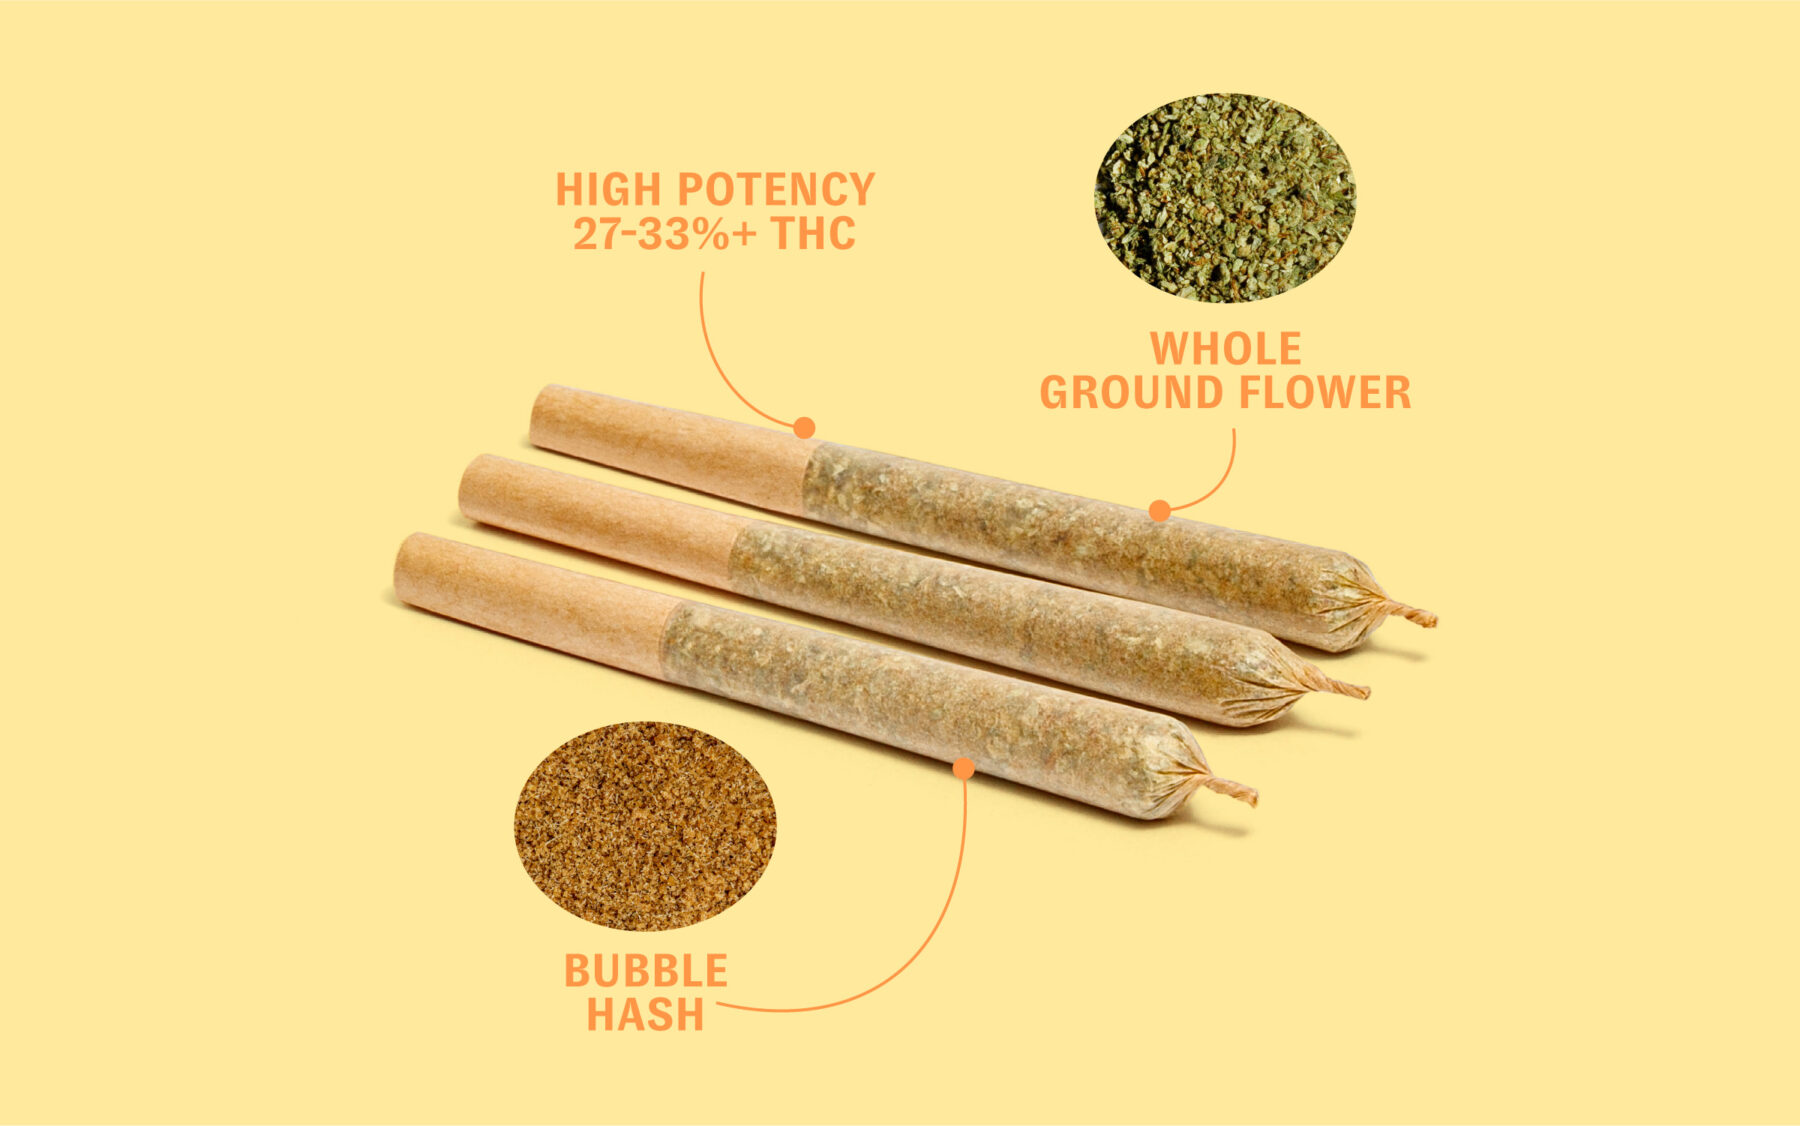 Bubble Hash Infused Black Cherry Punch Pre-Rolls joints. 
-High Potency
-Whole Ground Flower
-Bubble  Hash